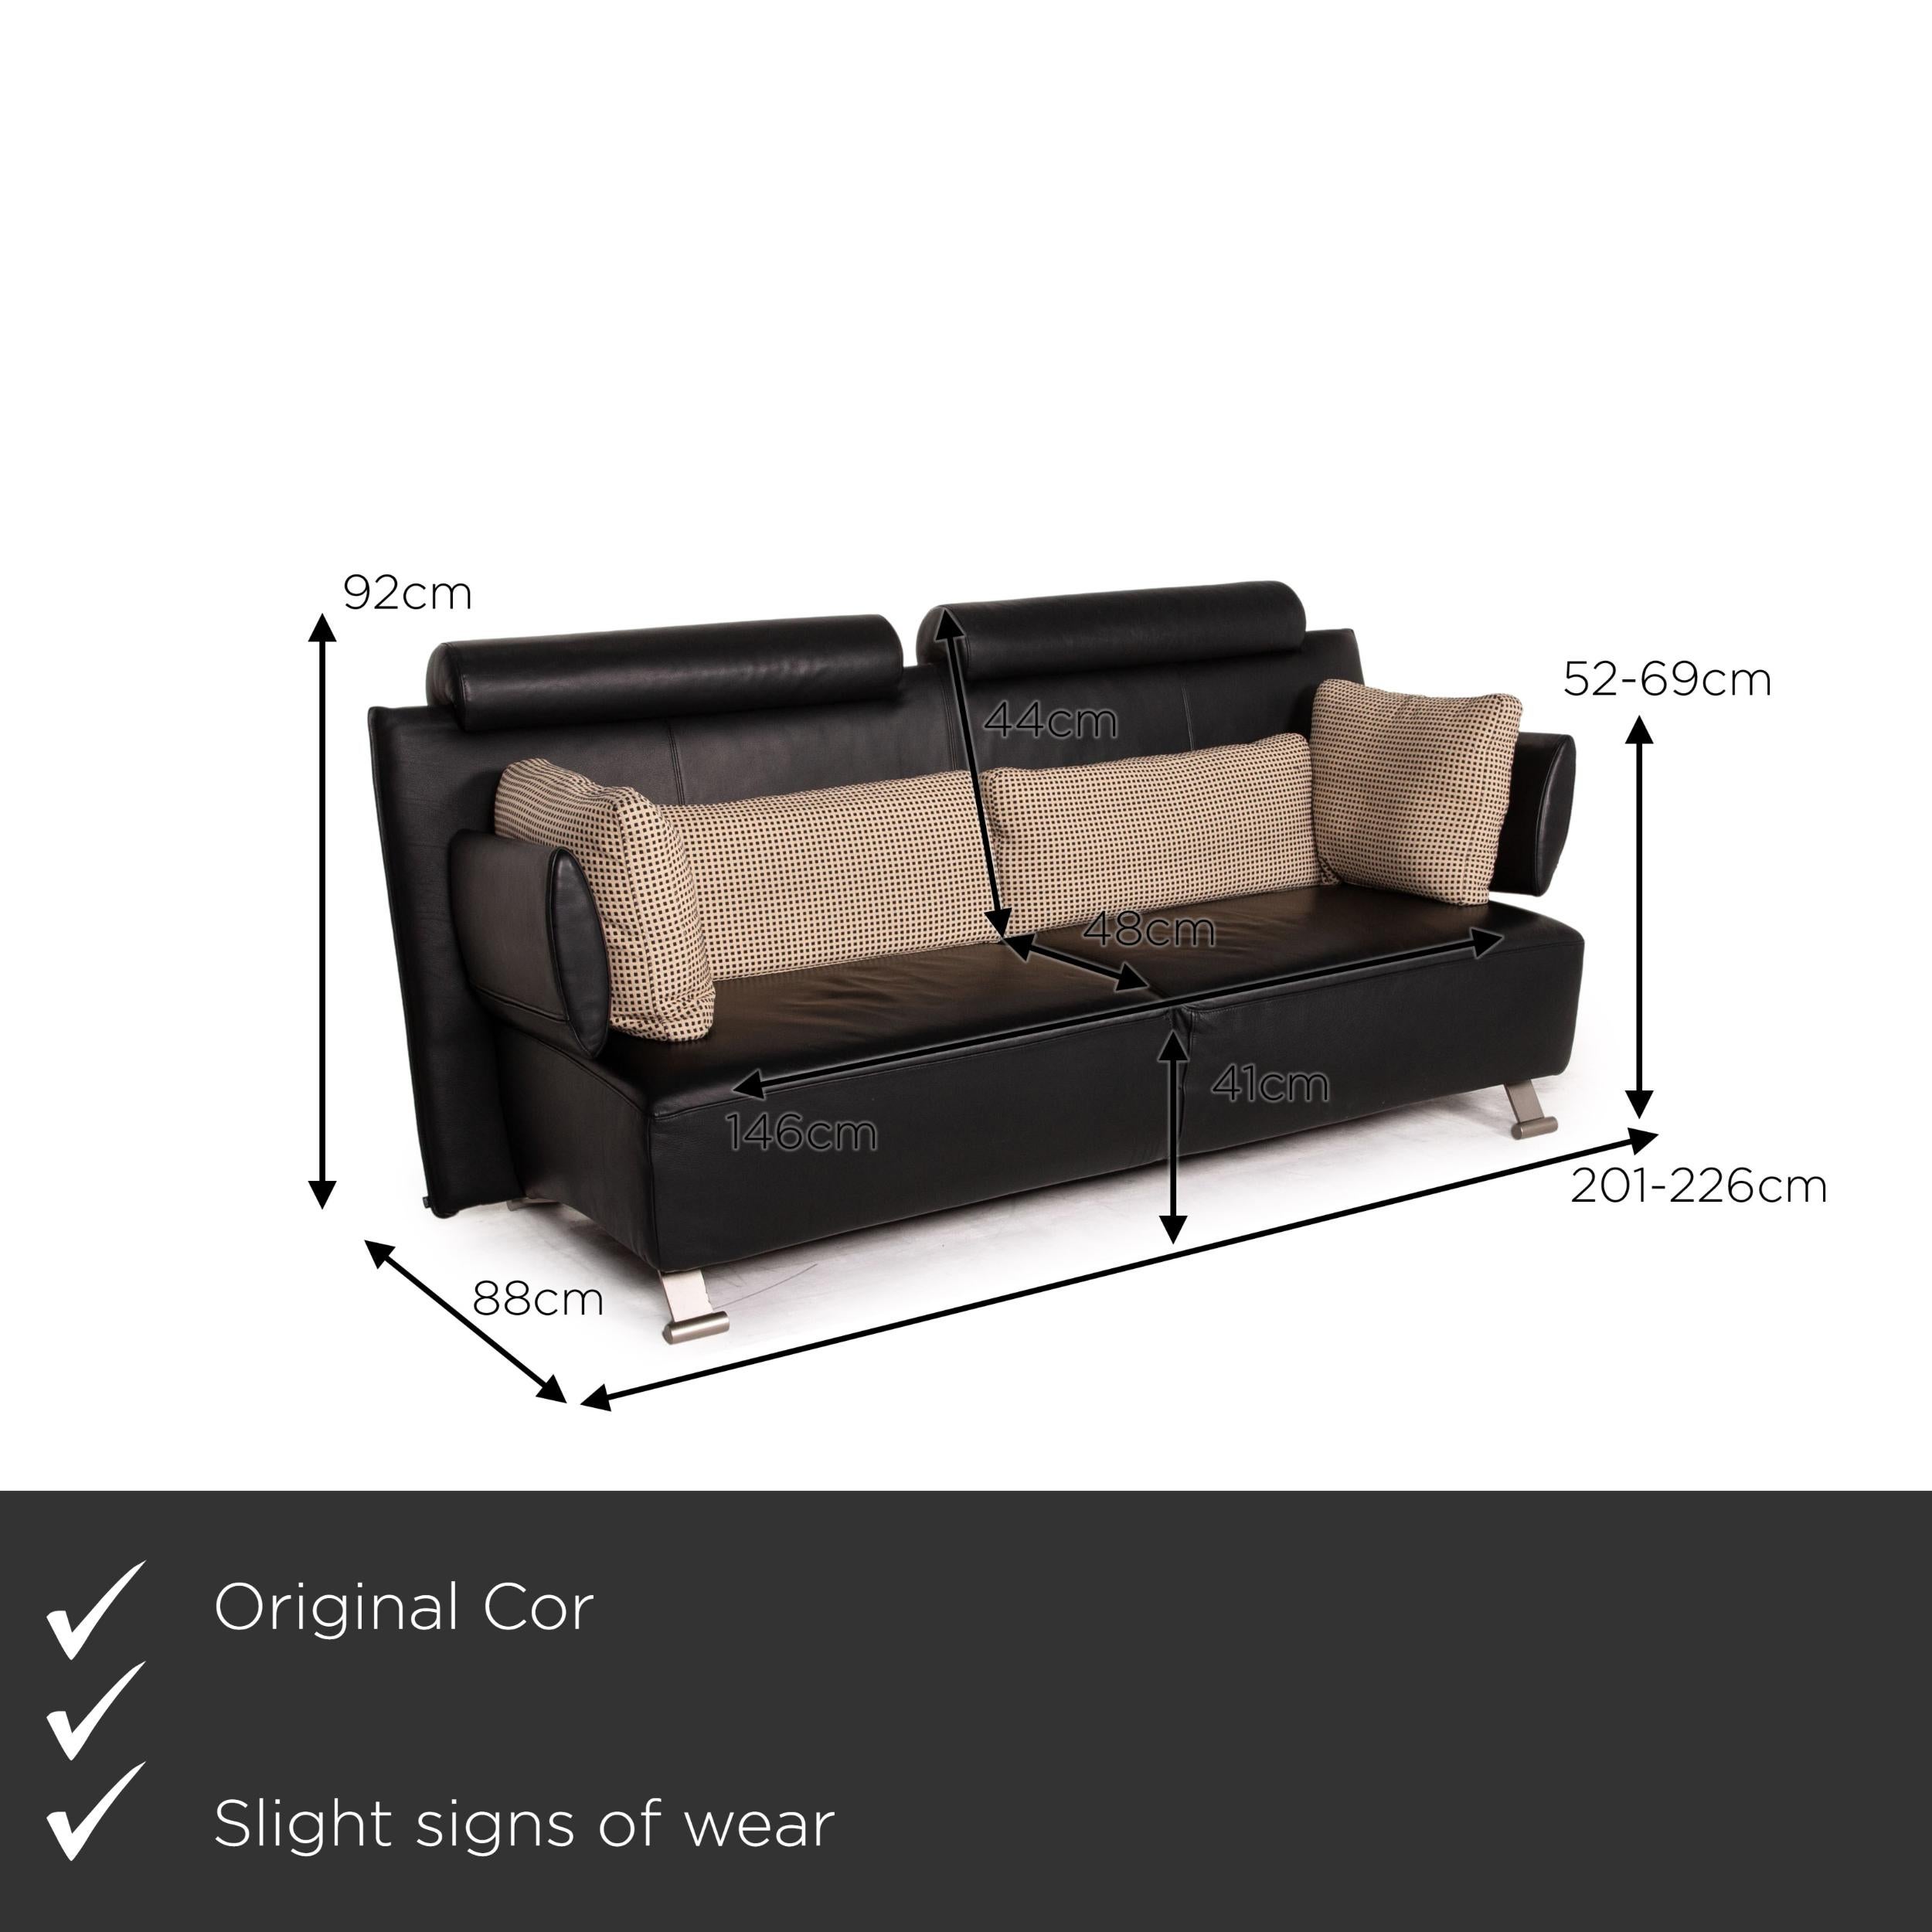 We present to you a Cor Sera leather sofa black two-seater function couch.
  
 

 Product measurements in centimeters:
 

 depth: 88
 width: 201
 height: 92
 seat height: 41
 rest height: 52
 seat depth: 48
 seat width: 146
 back